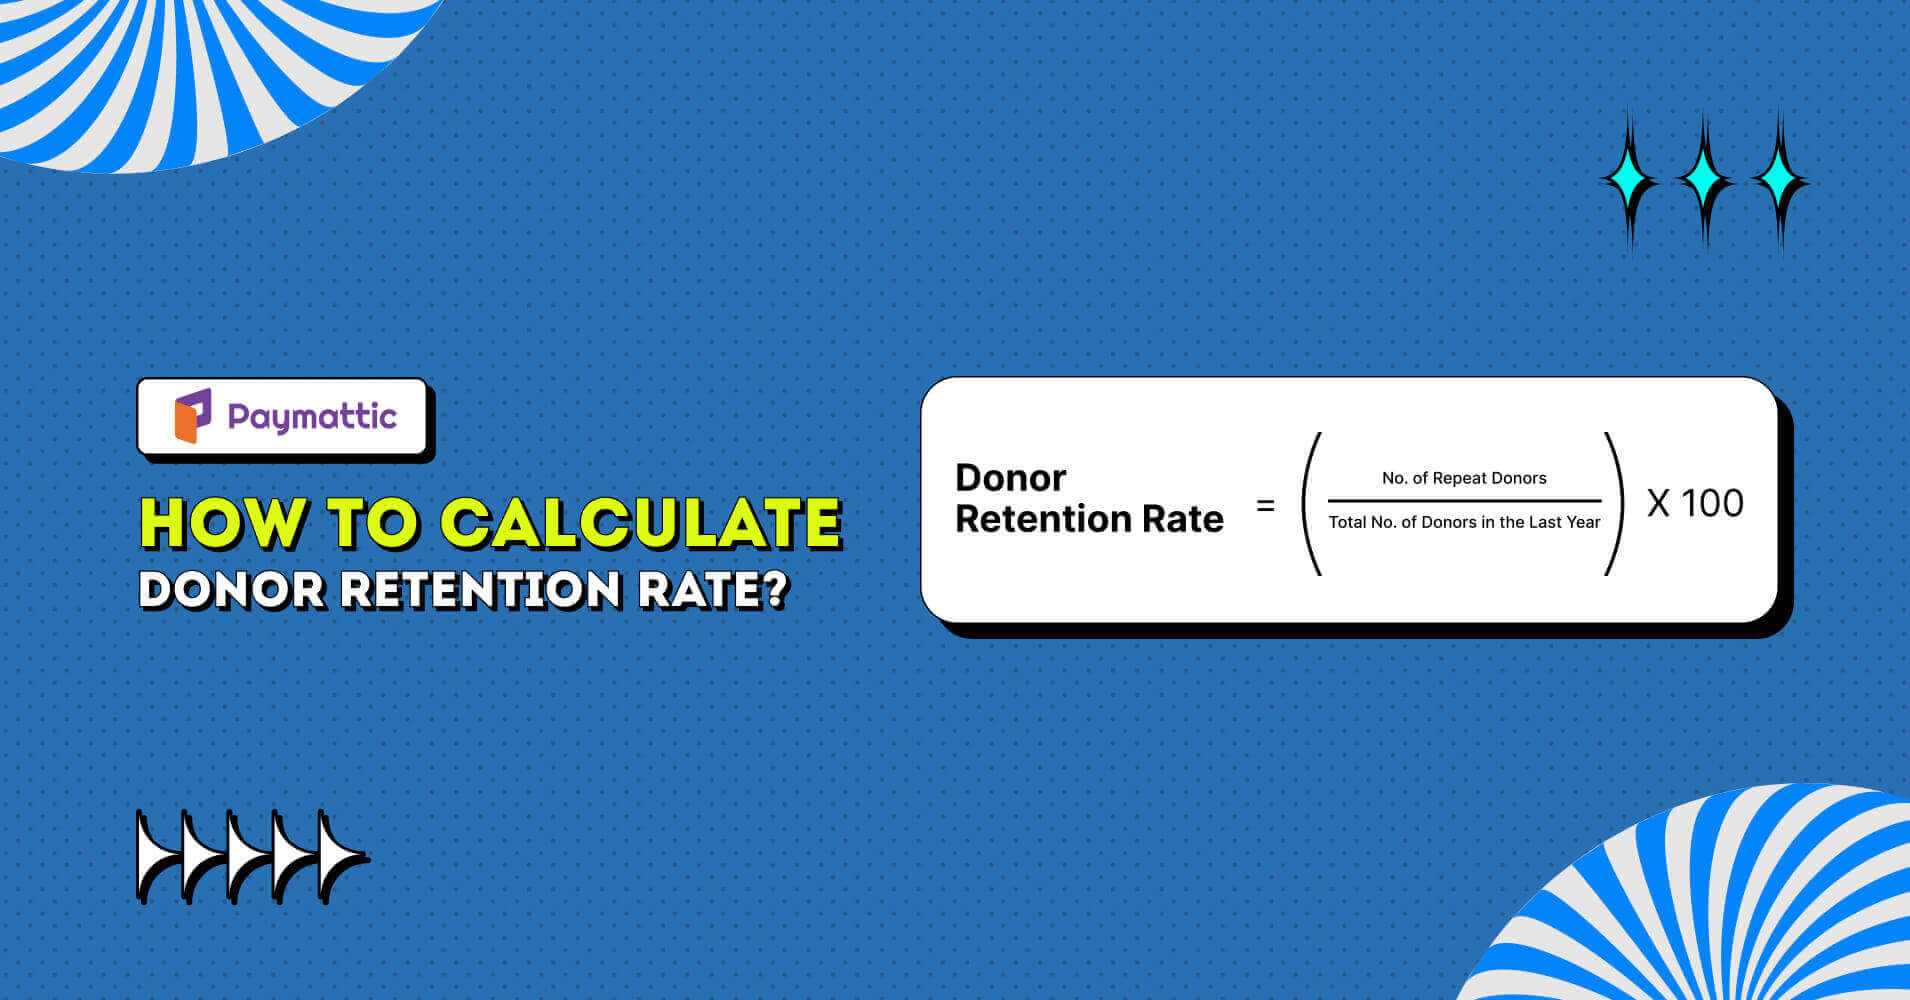 How to Calculate Donor Retention Rate